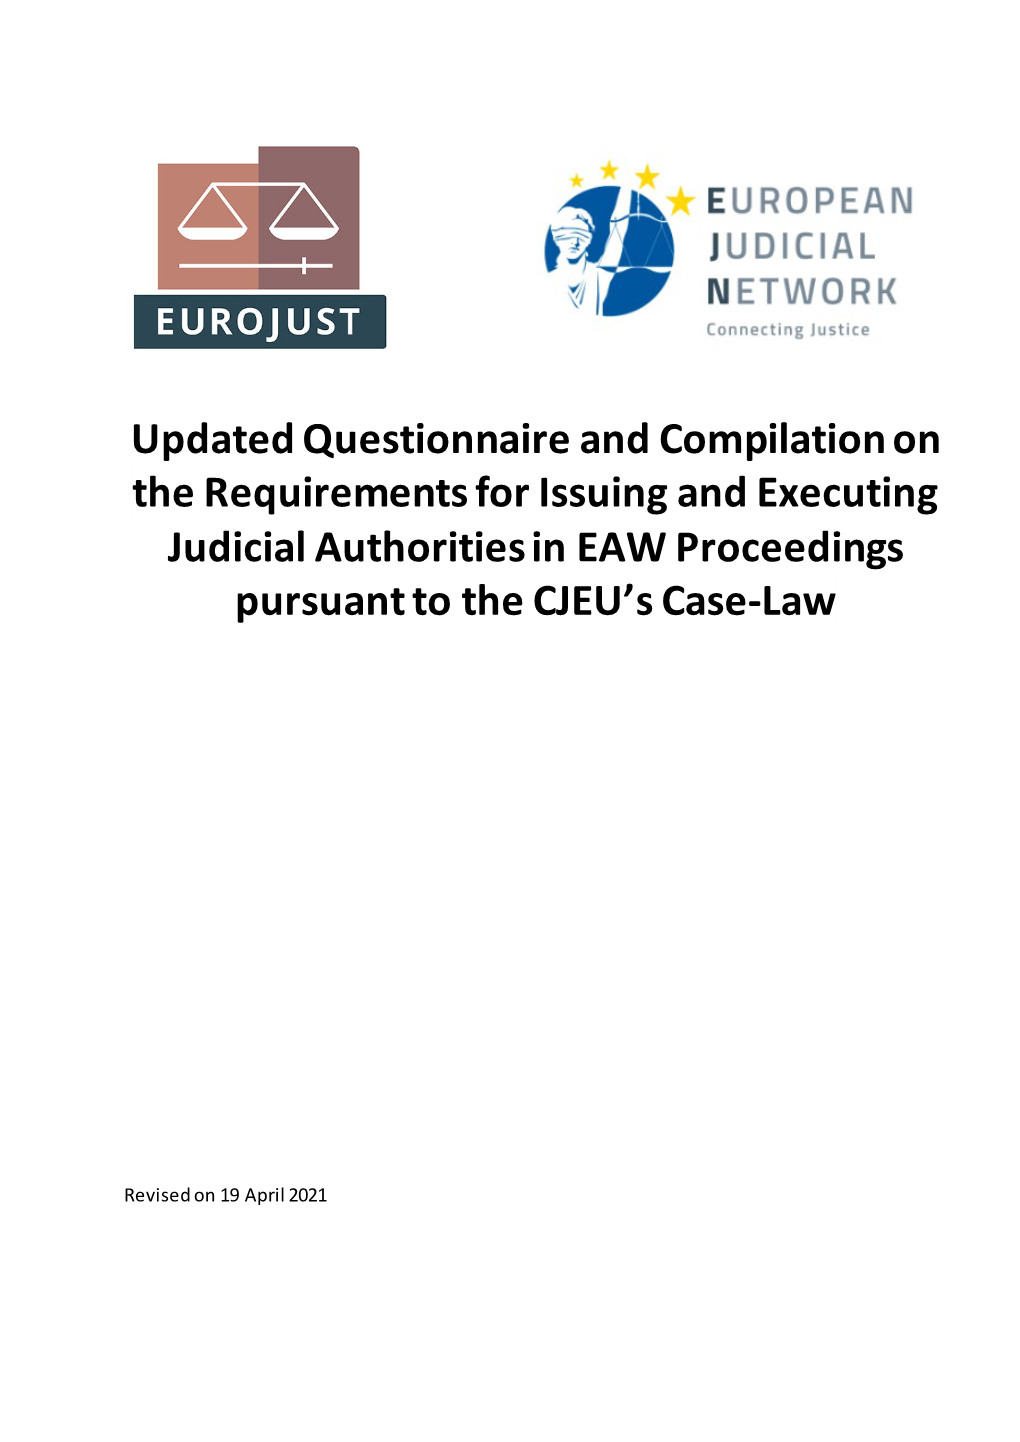 Questionnaire and Compilation on the Requirements for Issuing and Executing Judicial Authorities in EAW Proceedings Pursuant to the CJEU’S Case-Law